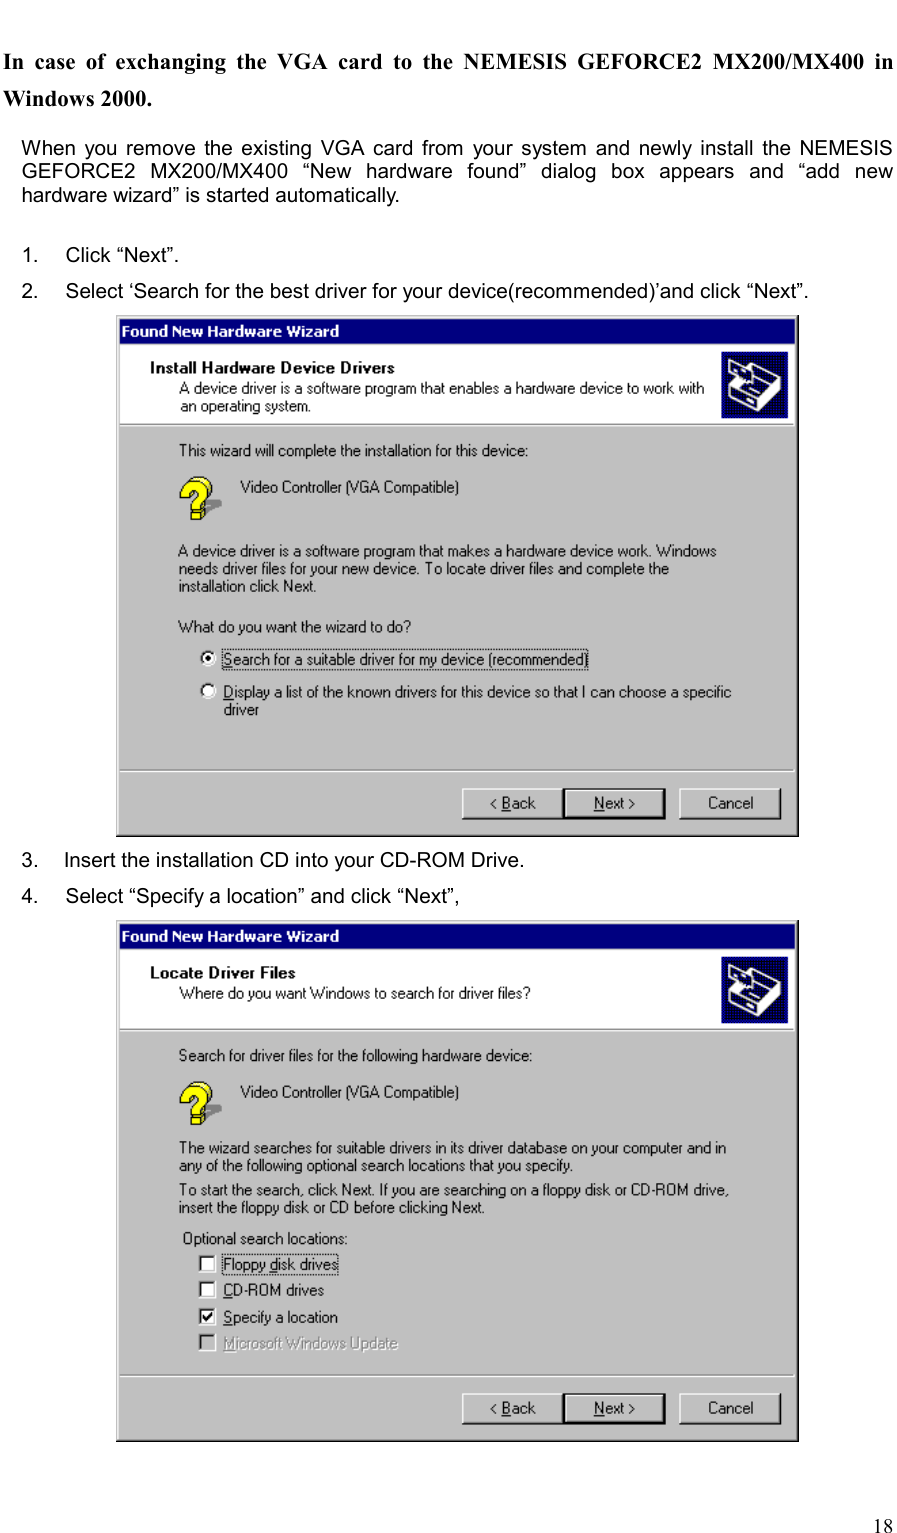     18 In case of exchanging the VGA card to the NEMESIS GEFORCE2 MX200/MX400 in Windows 2000.    When you remove the existing VGA card from your system and newly install the NEMESIS GEFORCE2 MX200/MX400 “New hardware found” dialog box appears and “add new hardware wizard” is started automatically.  1.   Click “Next”. 2.     Select ‘Search for the best driver for your device(recommended)’and click “Next”.  3.   Insert the installation CD into your CD-ROM Drive. 4.     Select “Specify a location” and click “Next”,    